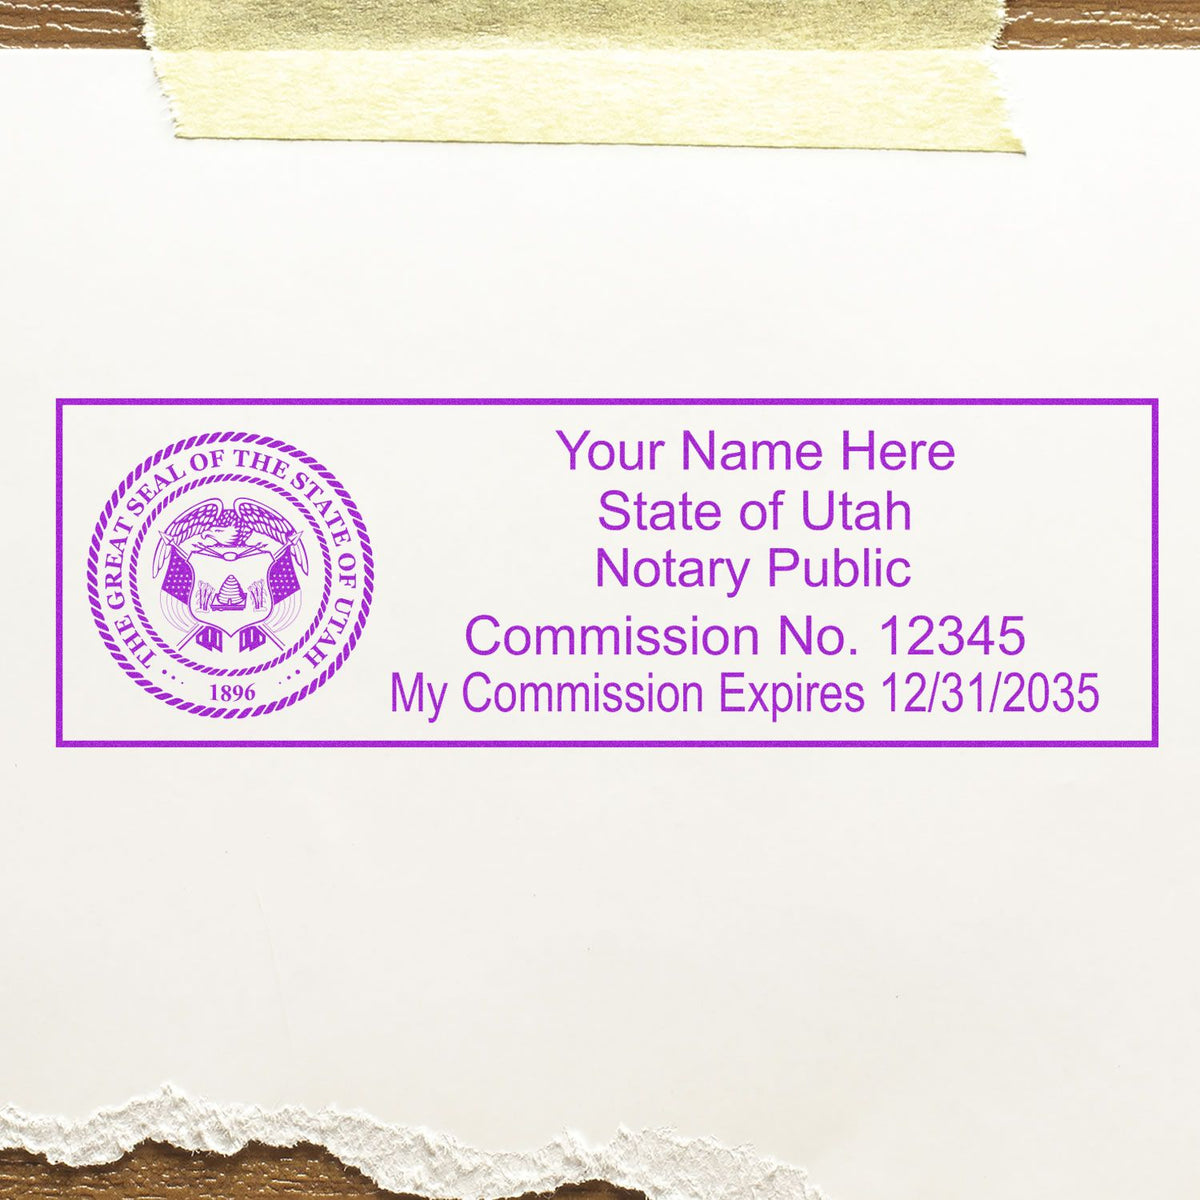 Another Example of a stamped impression of the Super Slim Utah Notary Public Stamp on a piece of office paper.